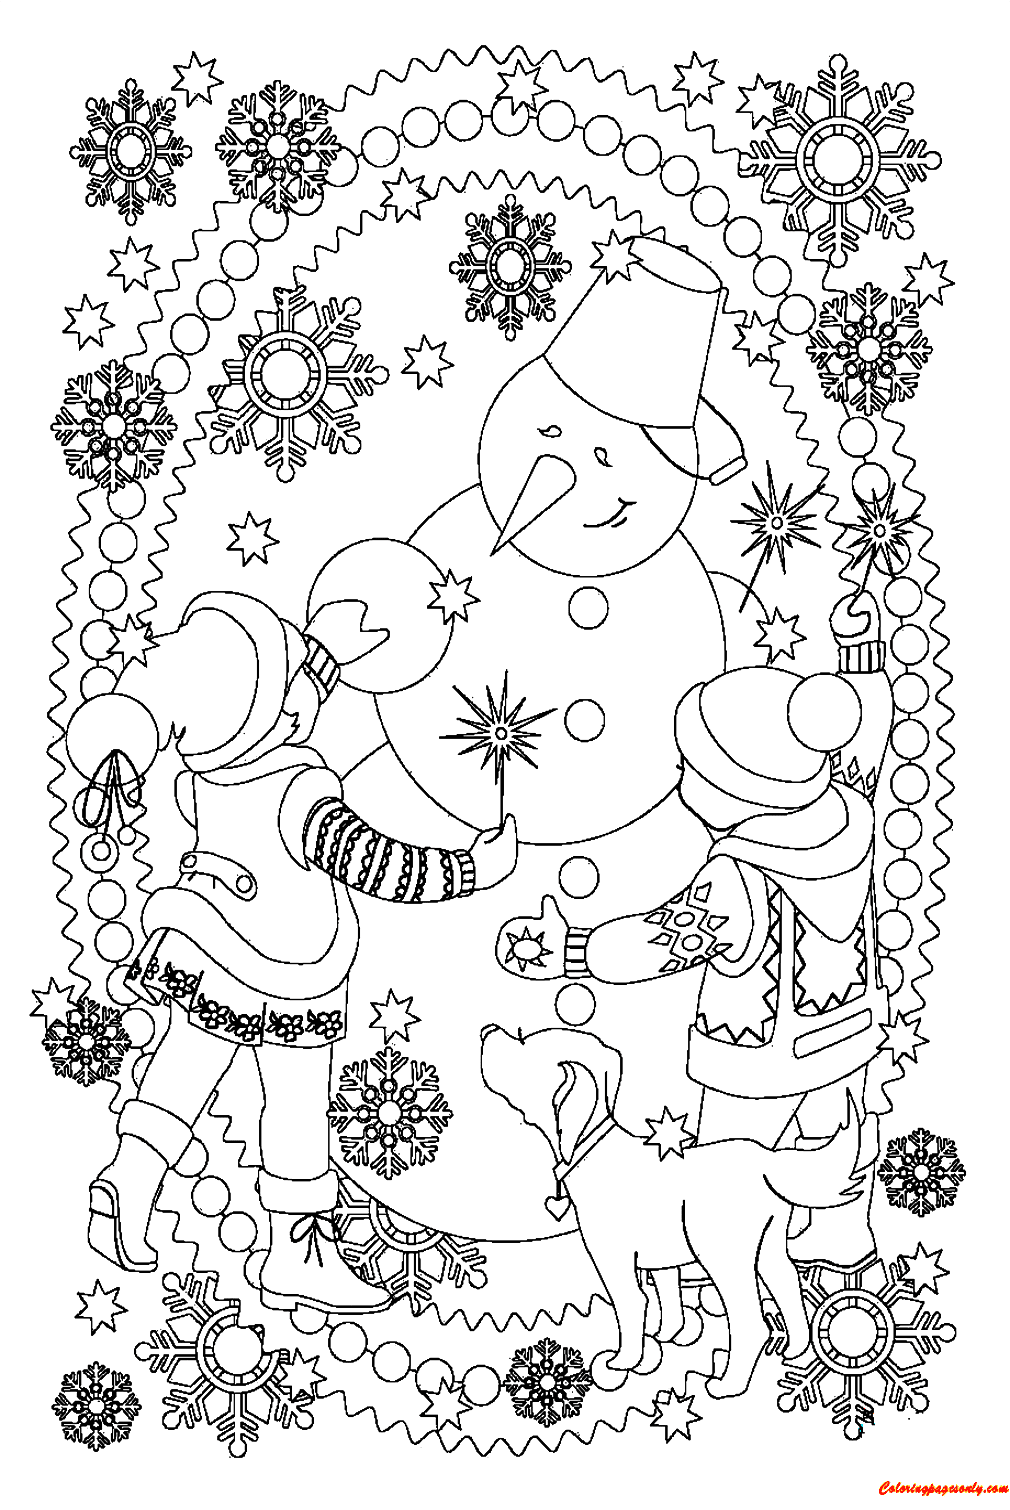 Playing With Snowman Coloring Pages